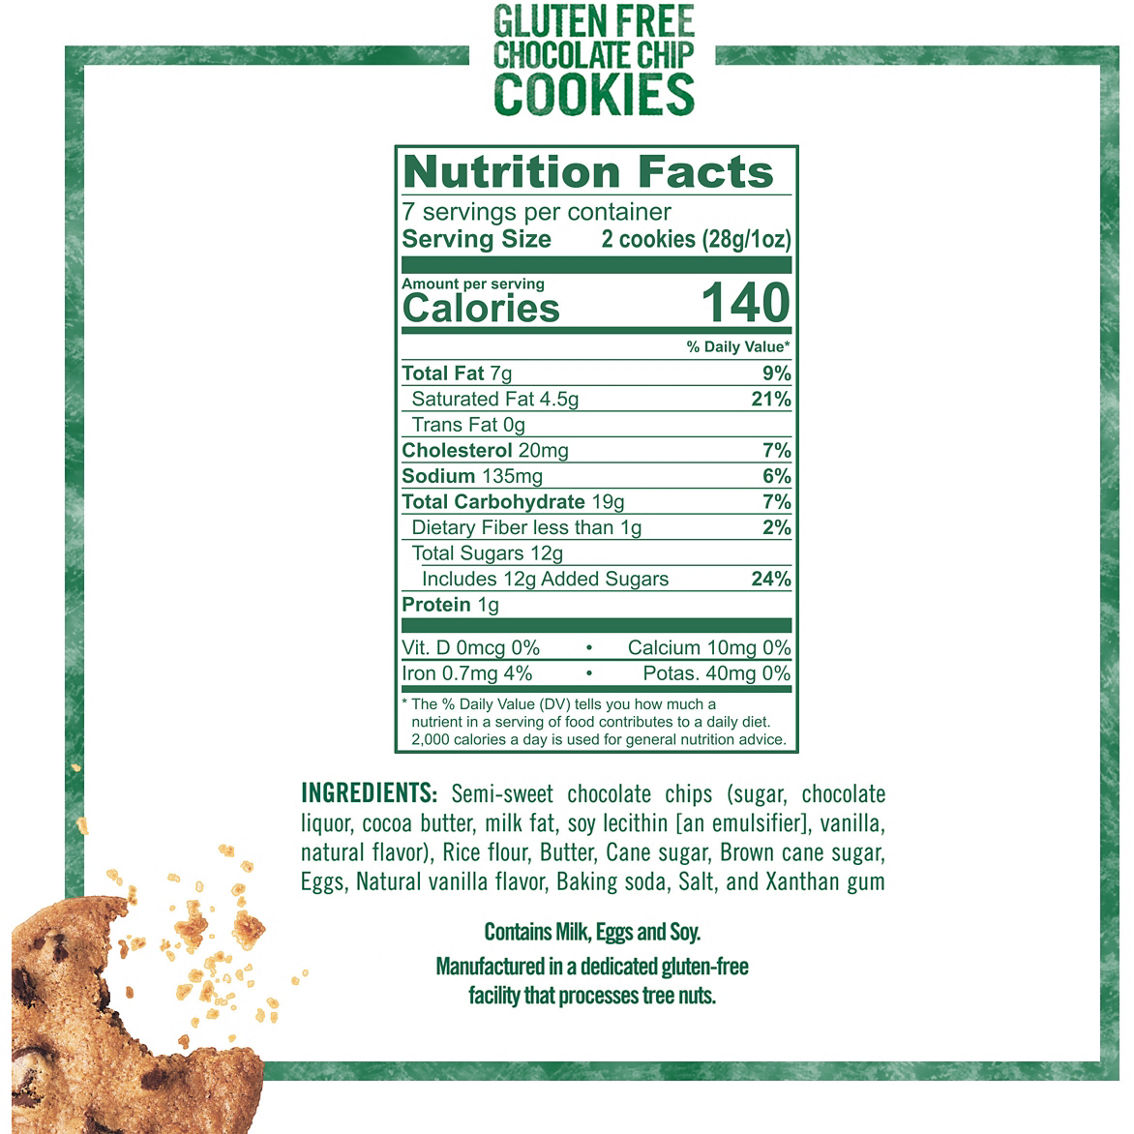 Tate's Gluten Free Chocolate Chip Cookies 7 oz - Image 2 of 2